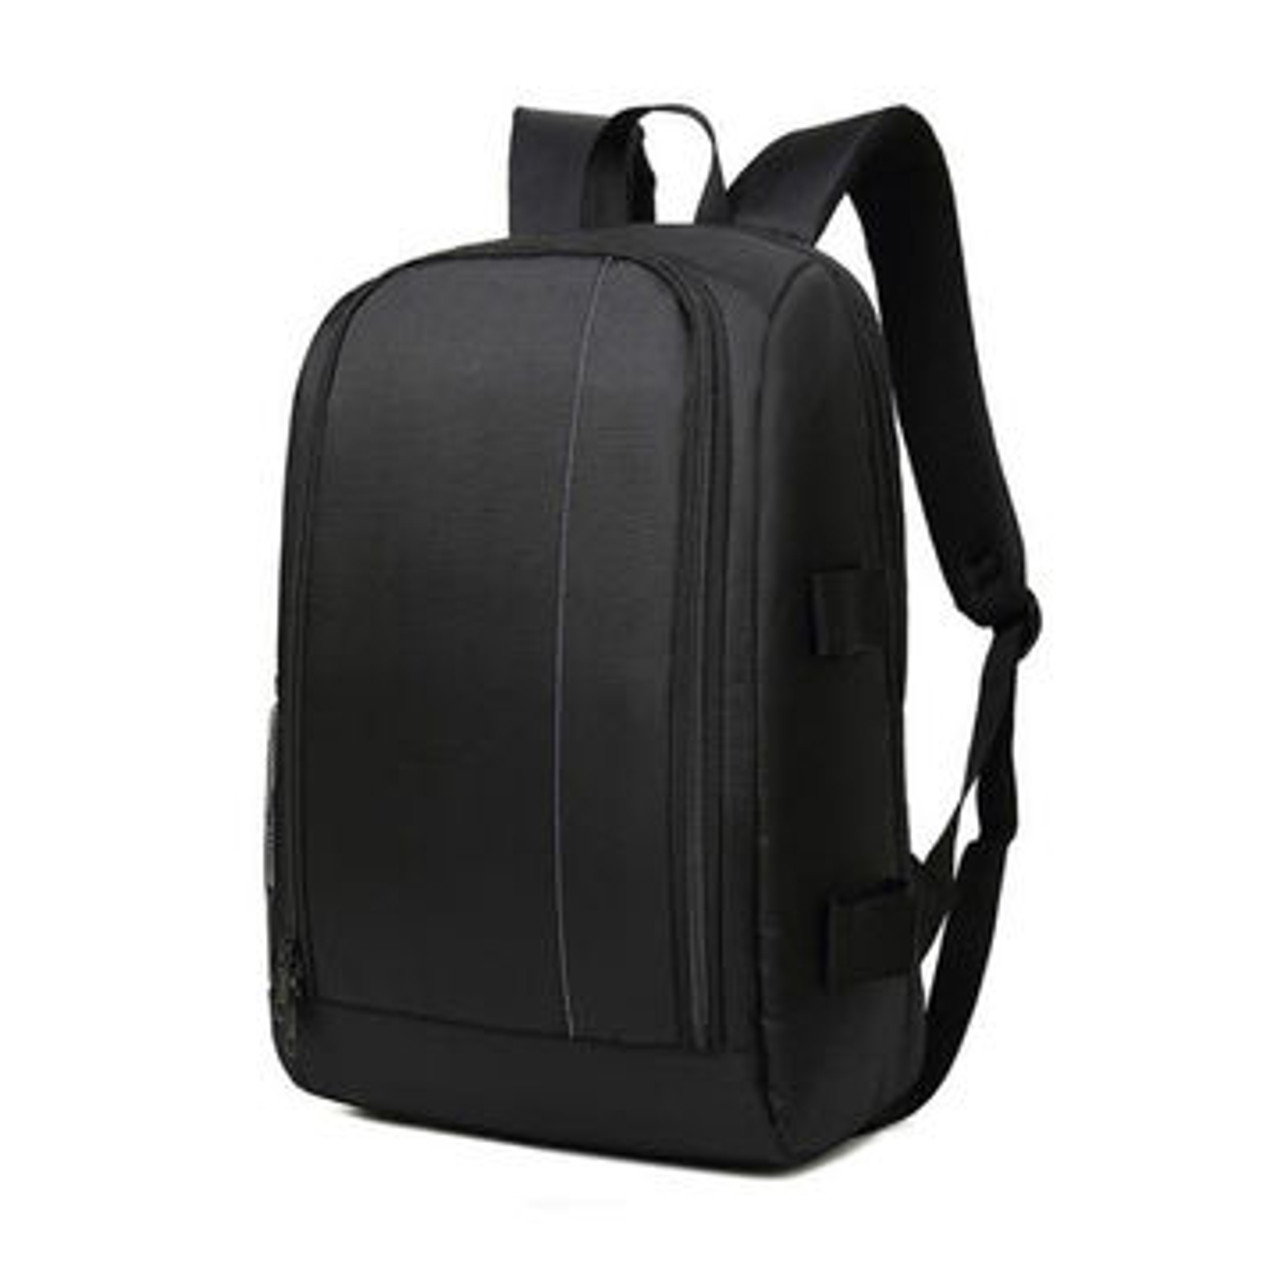 MATTERPORT BACKPACK CARRY CASE FOR PRO 2 - Safety Express